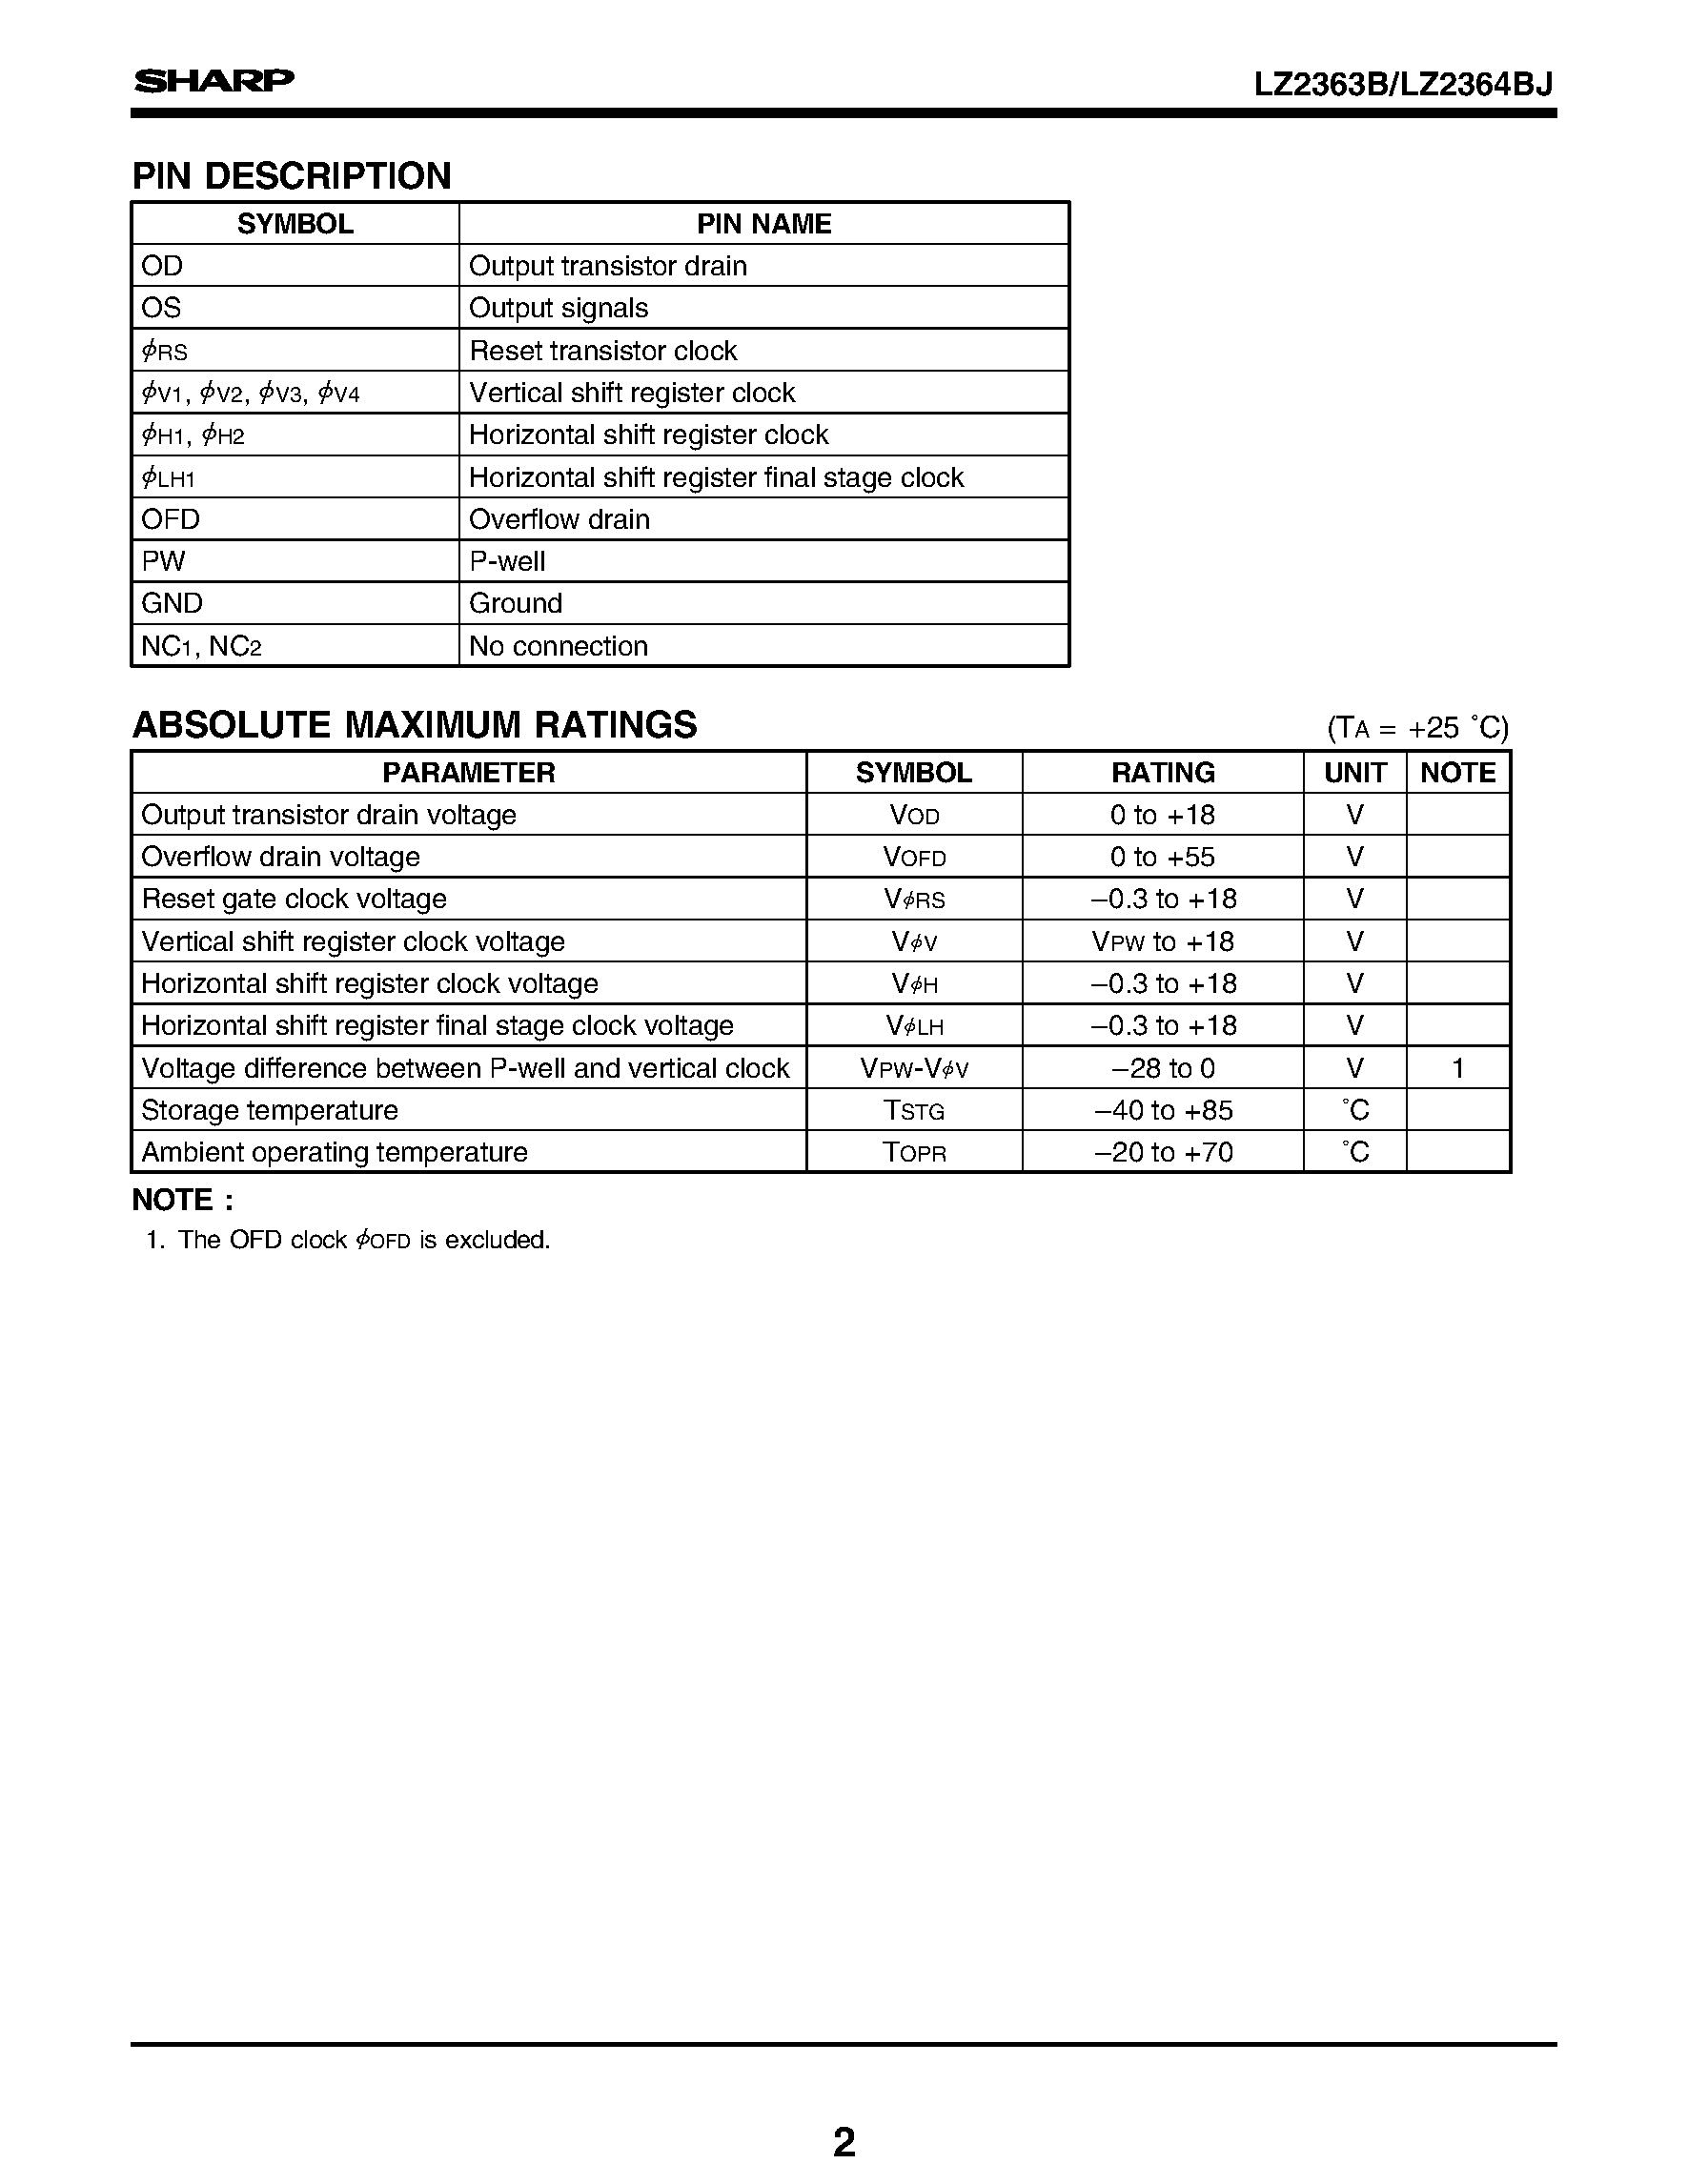 Datasheet LZ2364BJ - 1/3-type CCD Area Sensors with 470 k Pixels page 2